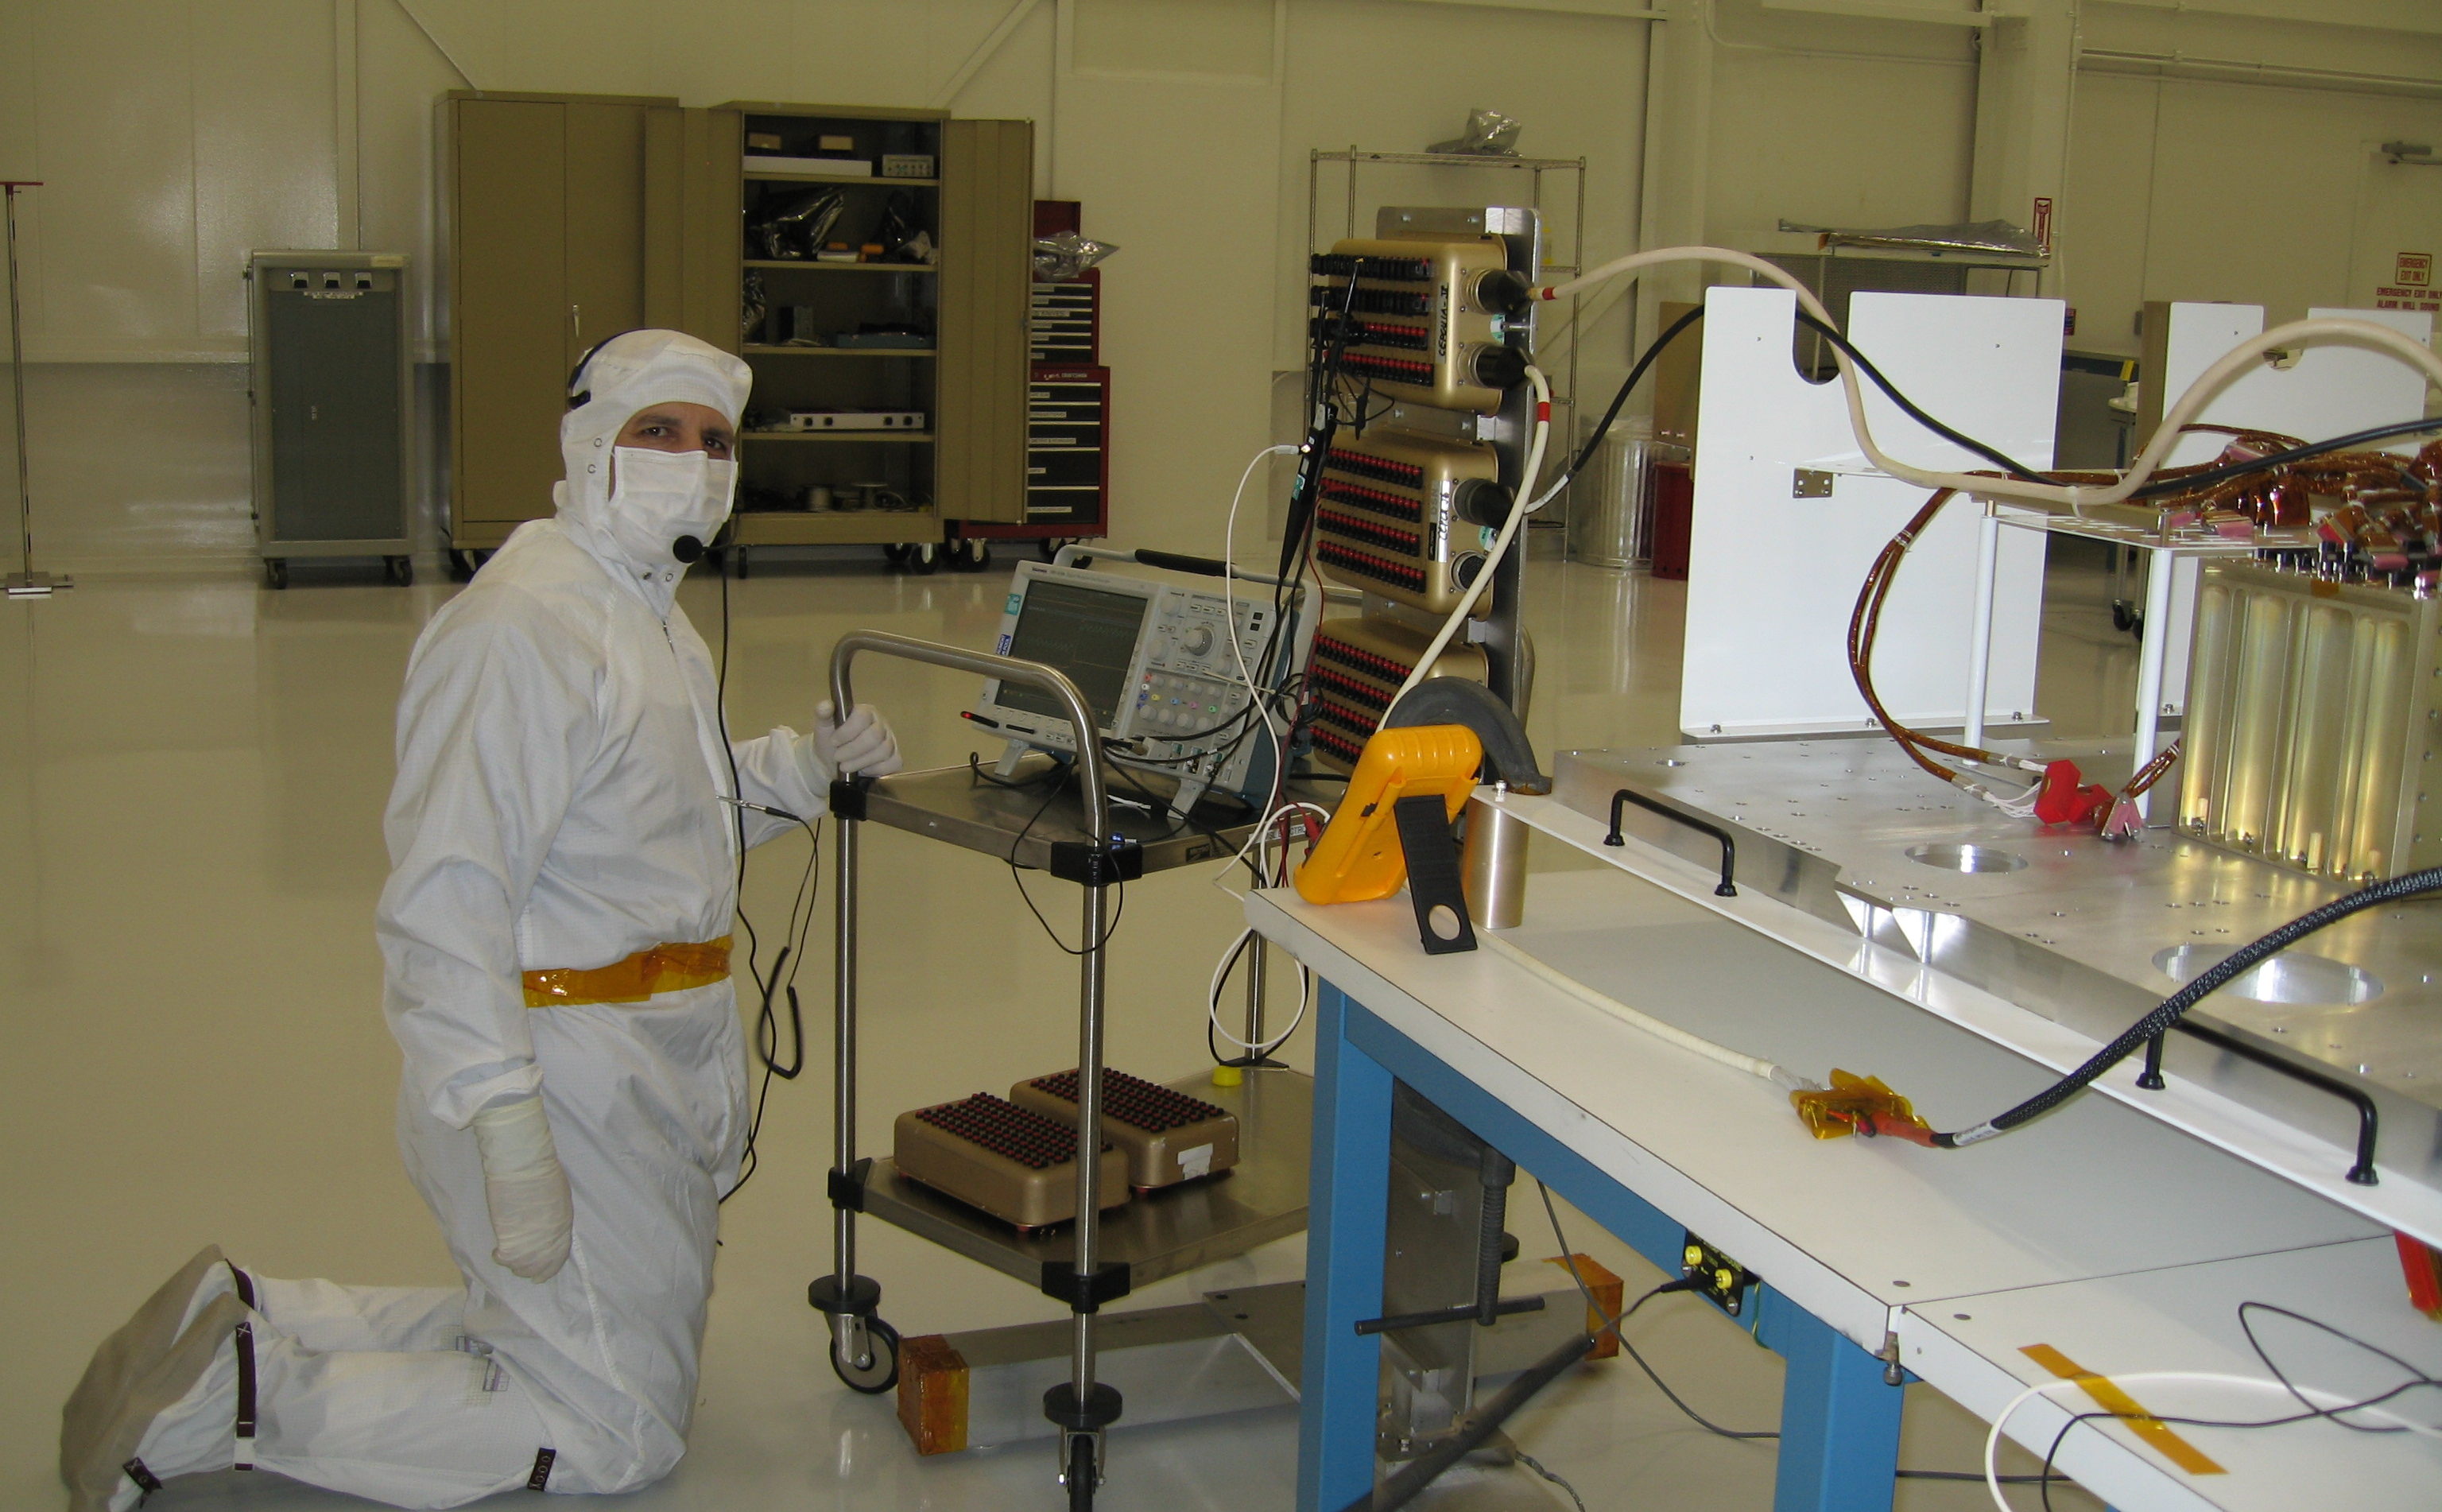 This image was taken inside a large 'clean room,' where ATLO (Assembly, Testing, and Launch Operations) is taking place for the Mars Science Laboratory mission. In the foreground on the right are electronic components and to the left is a man leaning over the components. He is dressed in all white protective clothing, including a face mask and gloves.